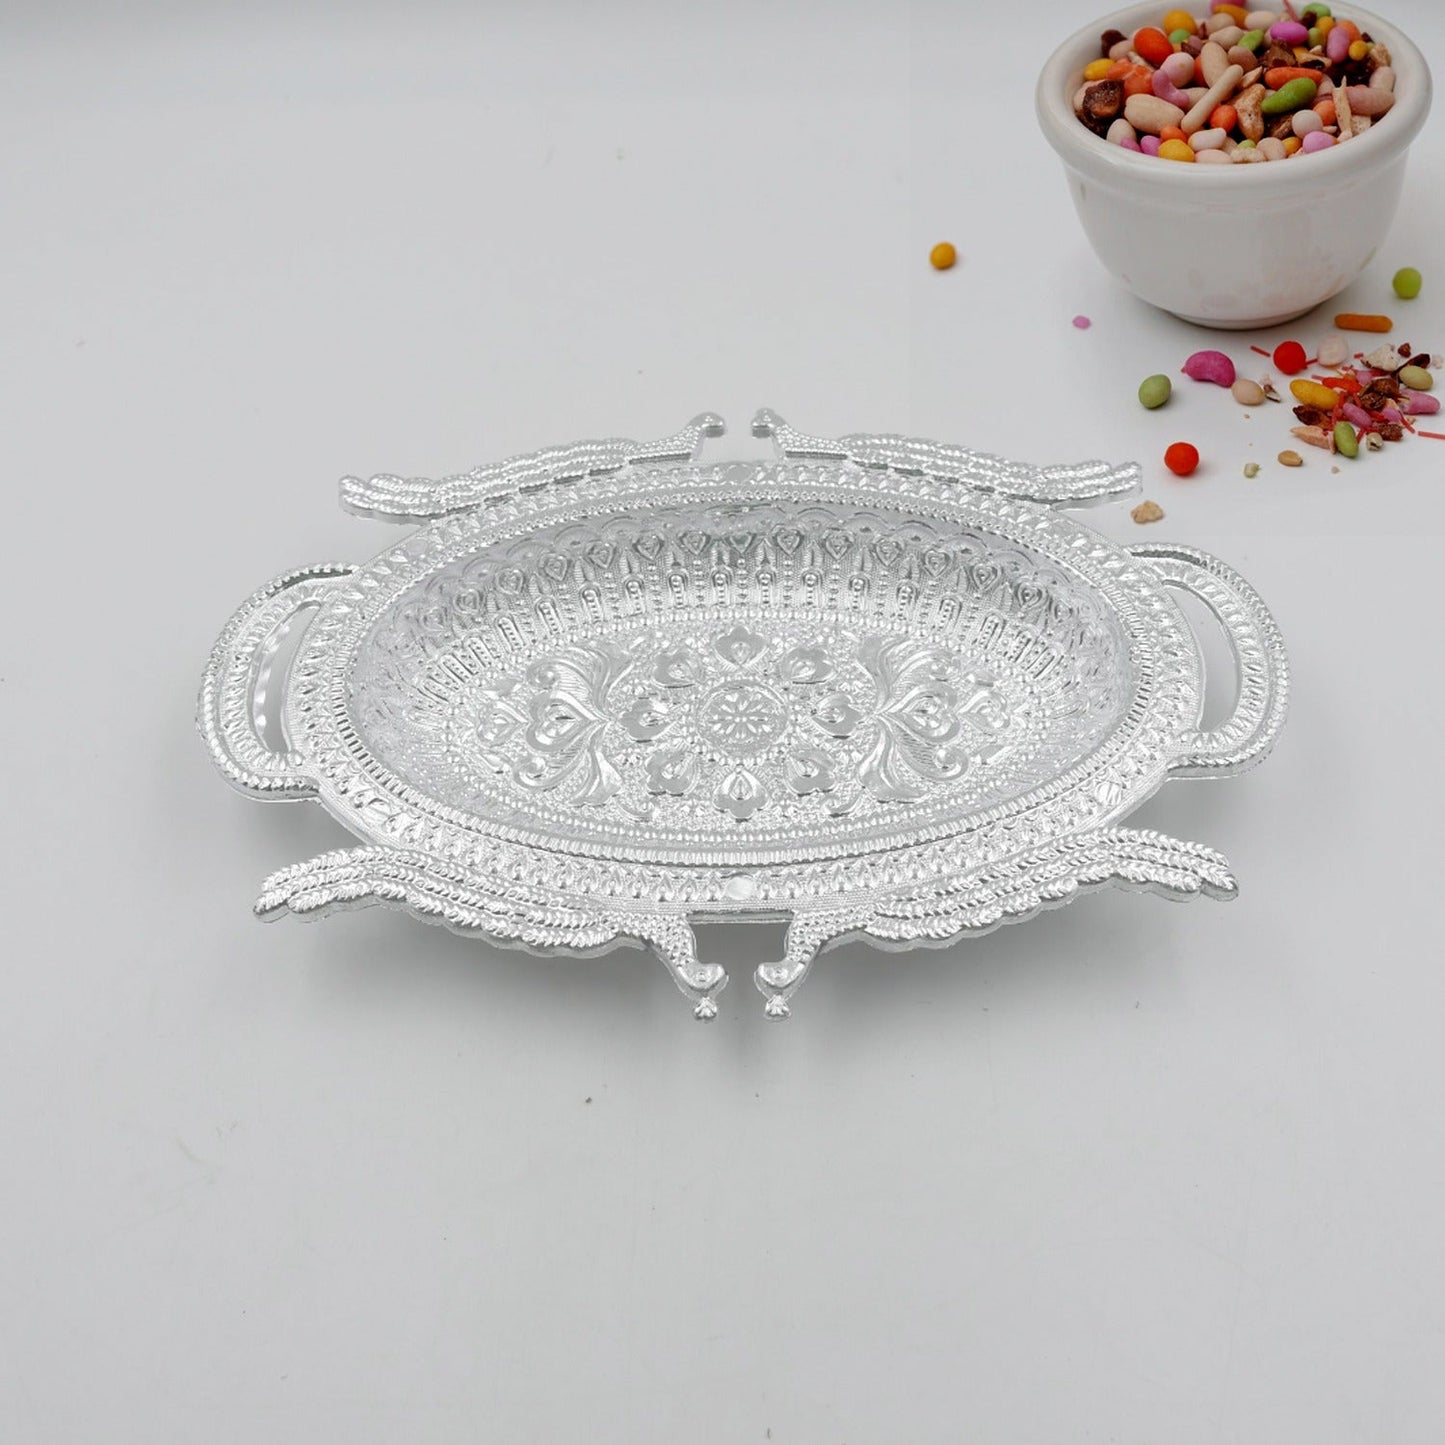 Decorative Mukhwas Serving Tray Serving Mukhwas Plate Fancy Candy Tray Dry Fruit Serving Tray